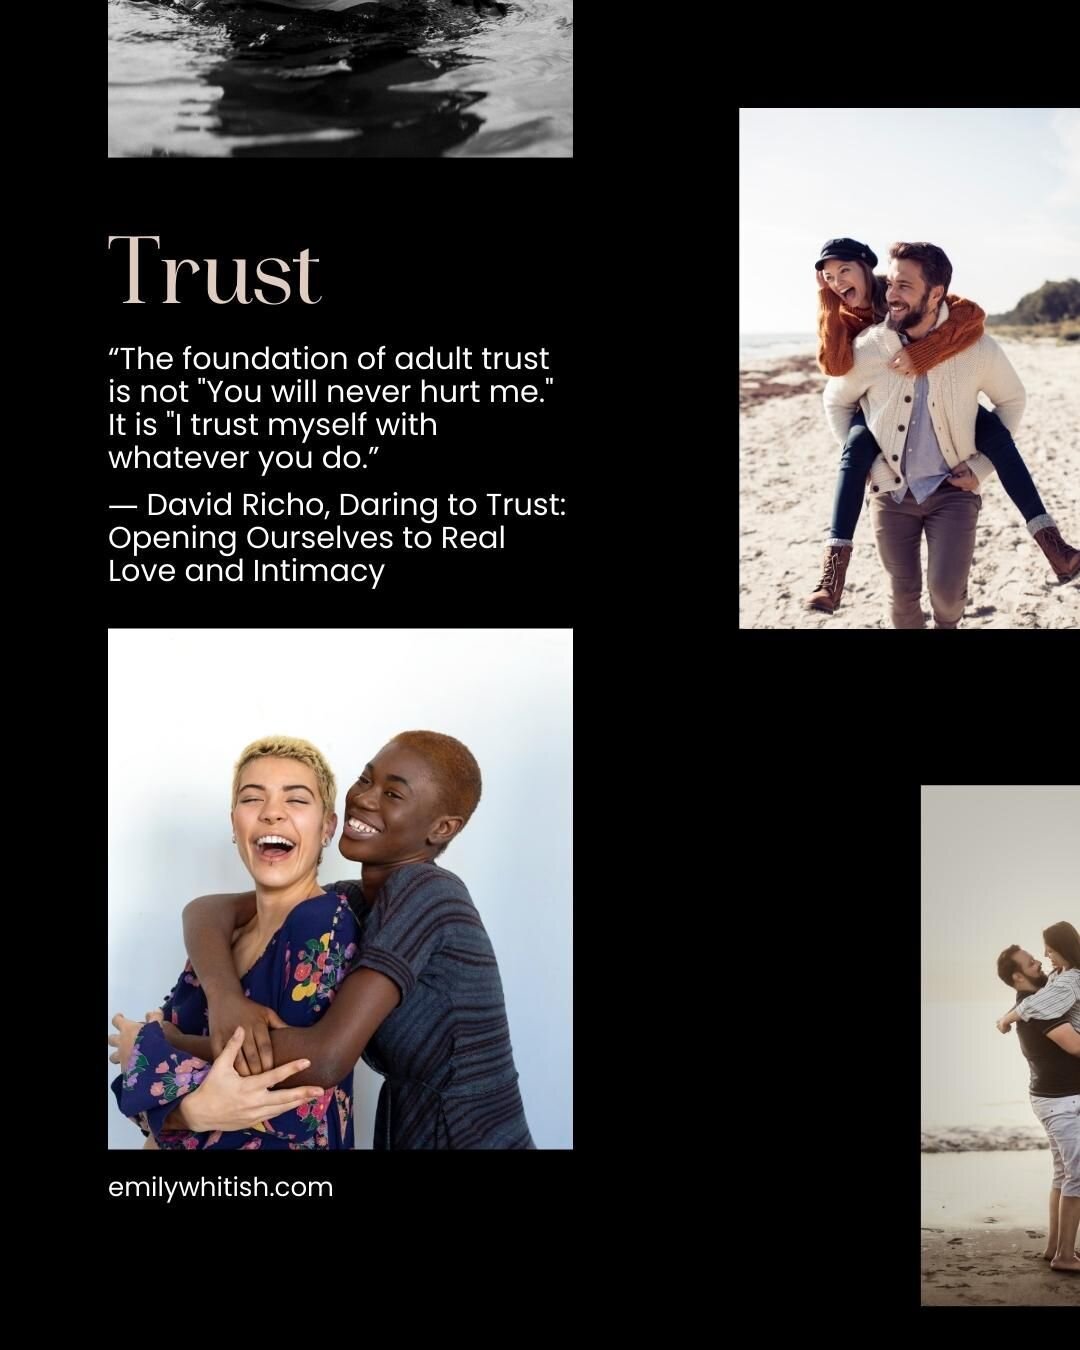 &ldquo;The foundation of adult trust is not &quot;You will never hurt me.&quot; It is &quot;I trust myself with whatever you do.&rdquo;

― David Richo, Daring to Trust: Opening Ourselves to Real Love and Intimacy